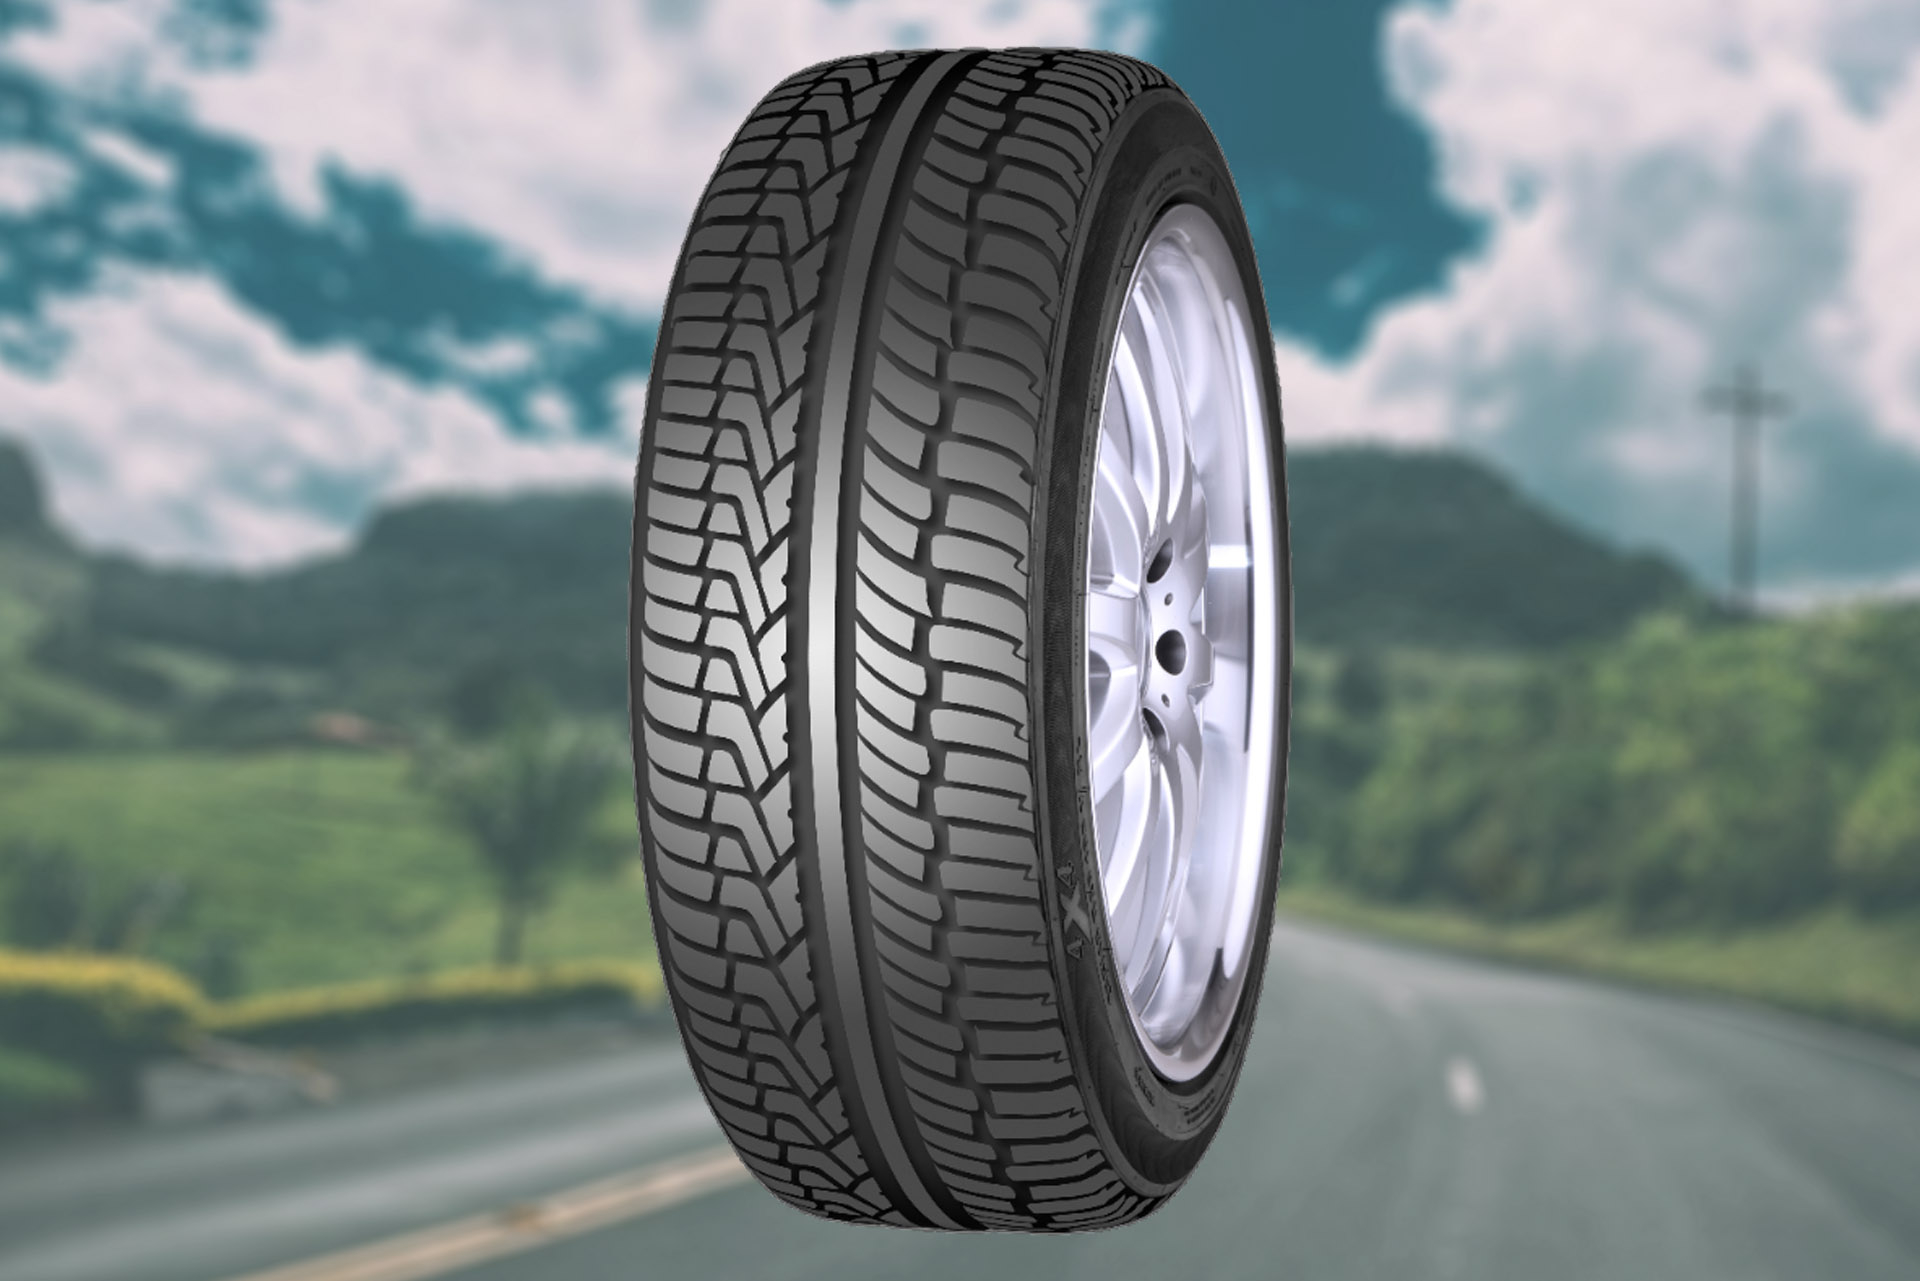 Forceum Heptagon SUV, Tyre Built For Stability